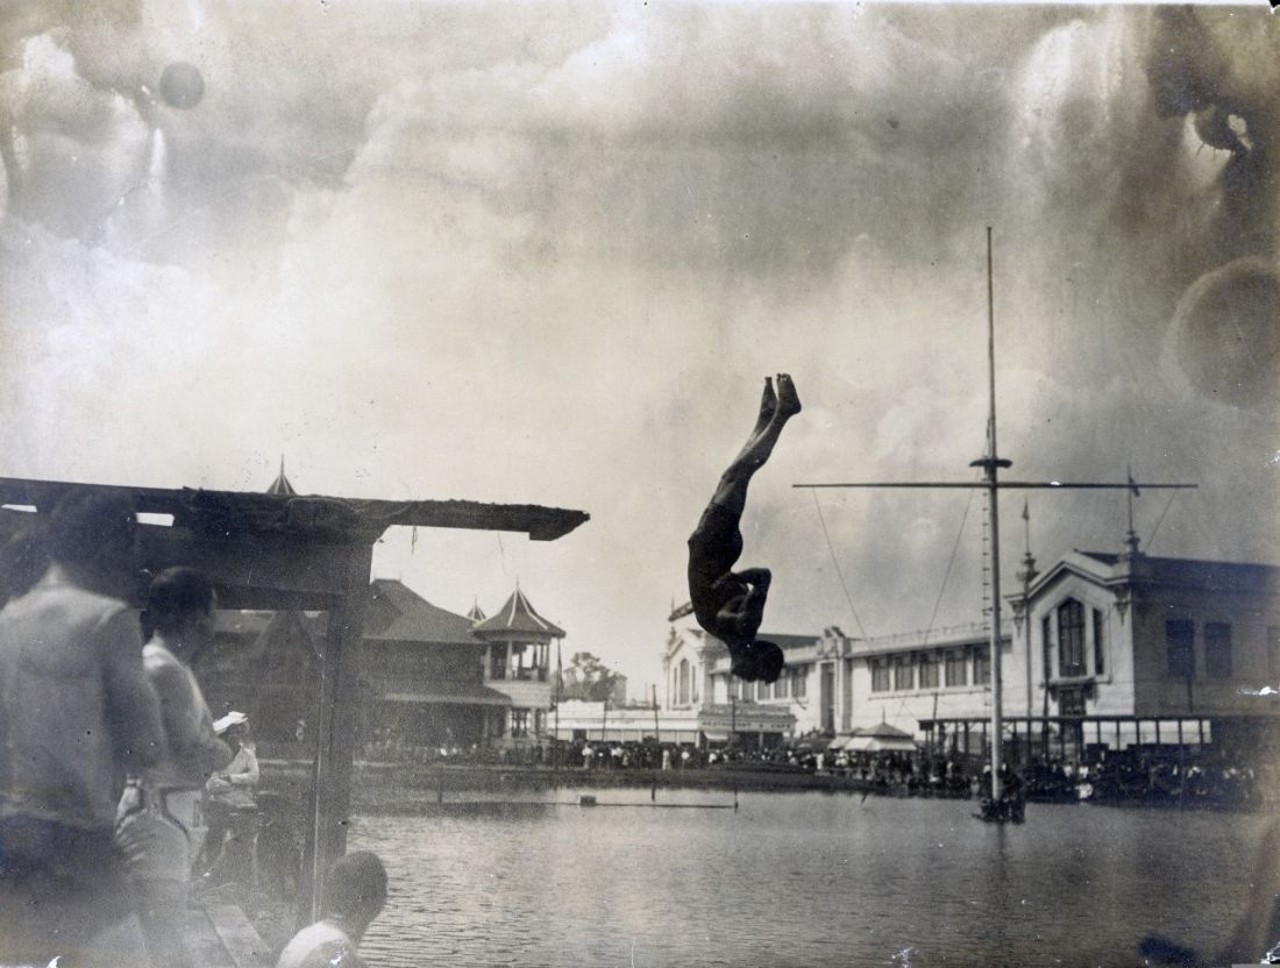 Frank Kehoe, also known as Keogh, of the Chicago Athletic Association During the Fancy Diving Competition at the 1904 Olympics
Many of the medals are still being contested due to the nationalities of winners. Some competitors from the United States were recent immigrants who had recently moved to the U.S. and had not been granted citizenship, so this can result in medals being moved around, Clark said.